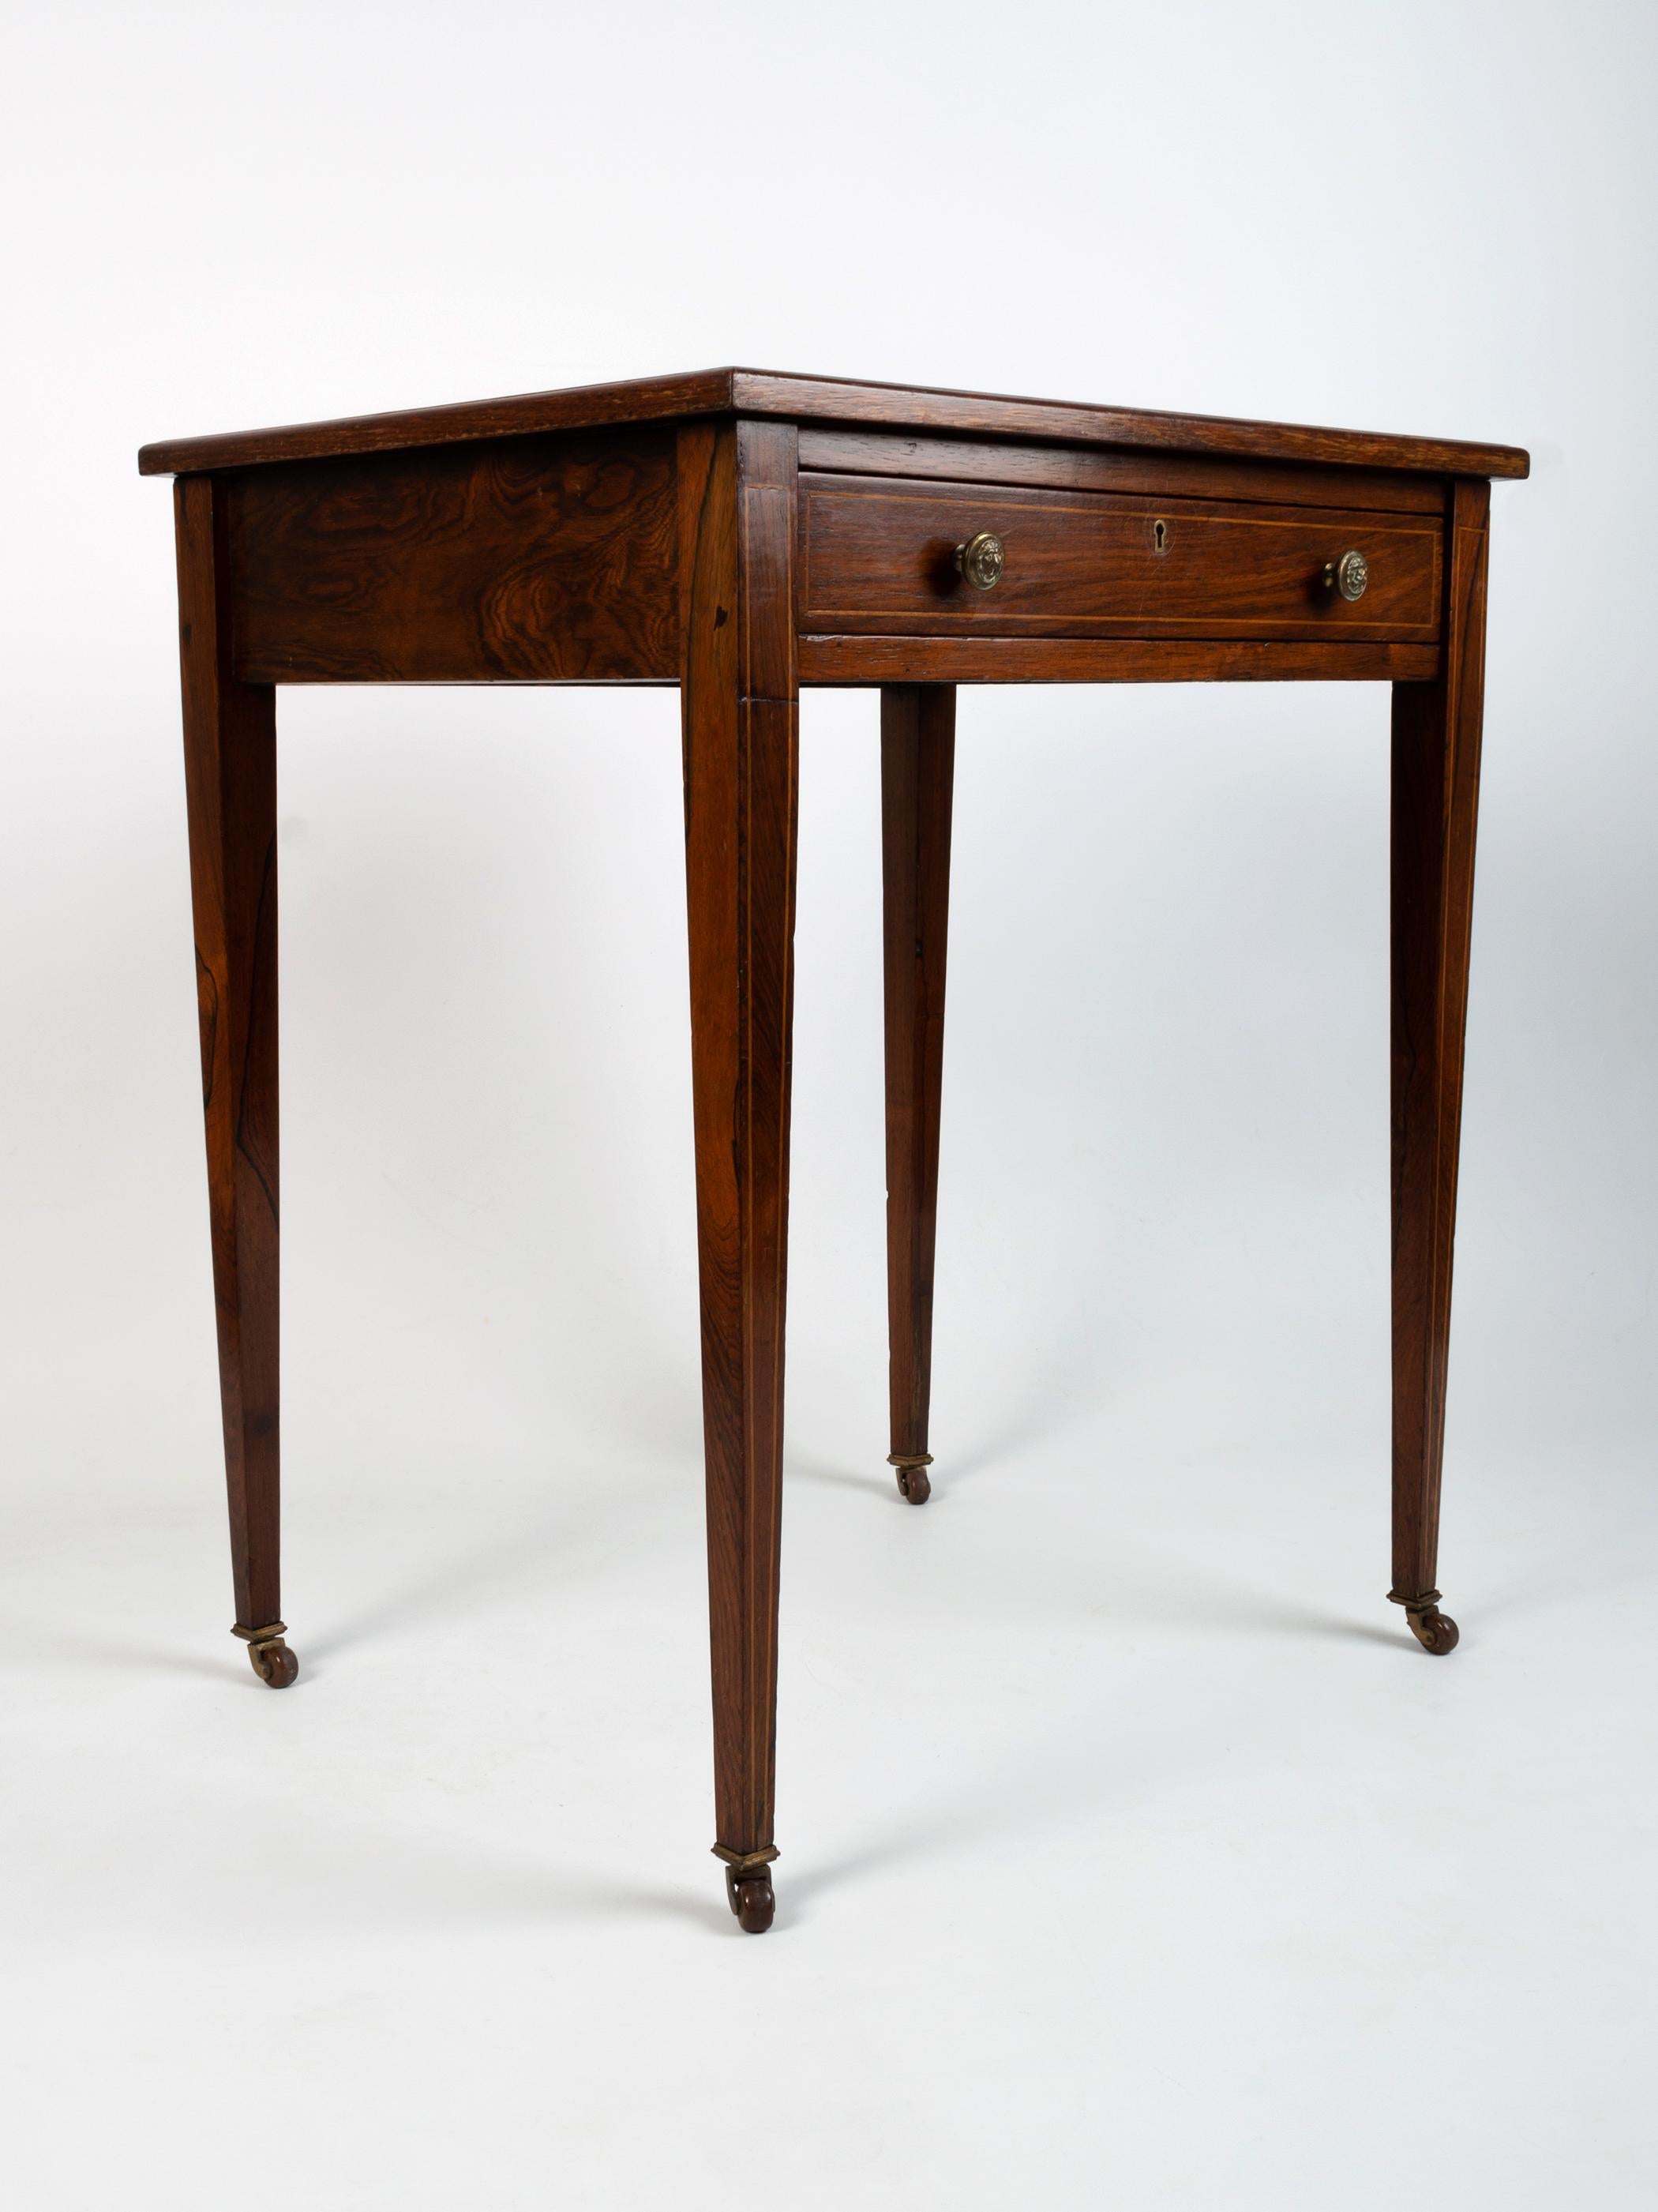 Antique English Georgian Style Rosewood Leather Inlaid Writing Table C.1900.

A neatly proportioned desk, beautifully inlaid. Clean lines and simple design in the classic George III manner.

The cross banded top surface is presented with a